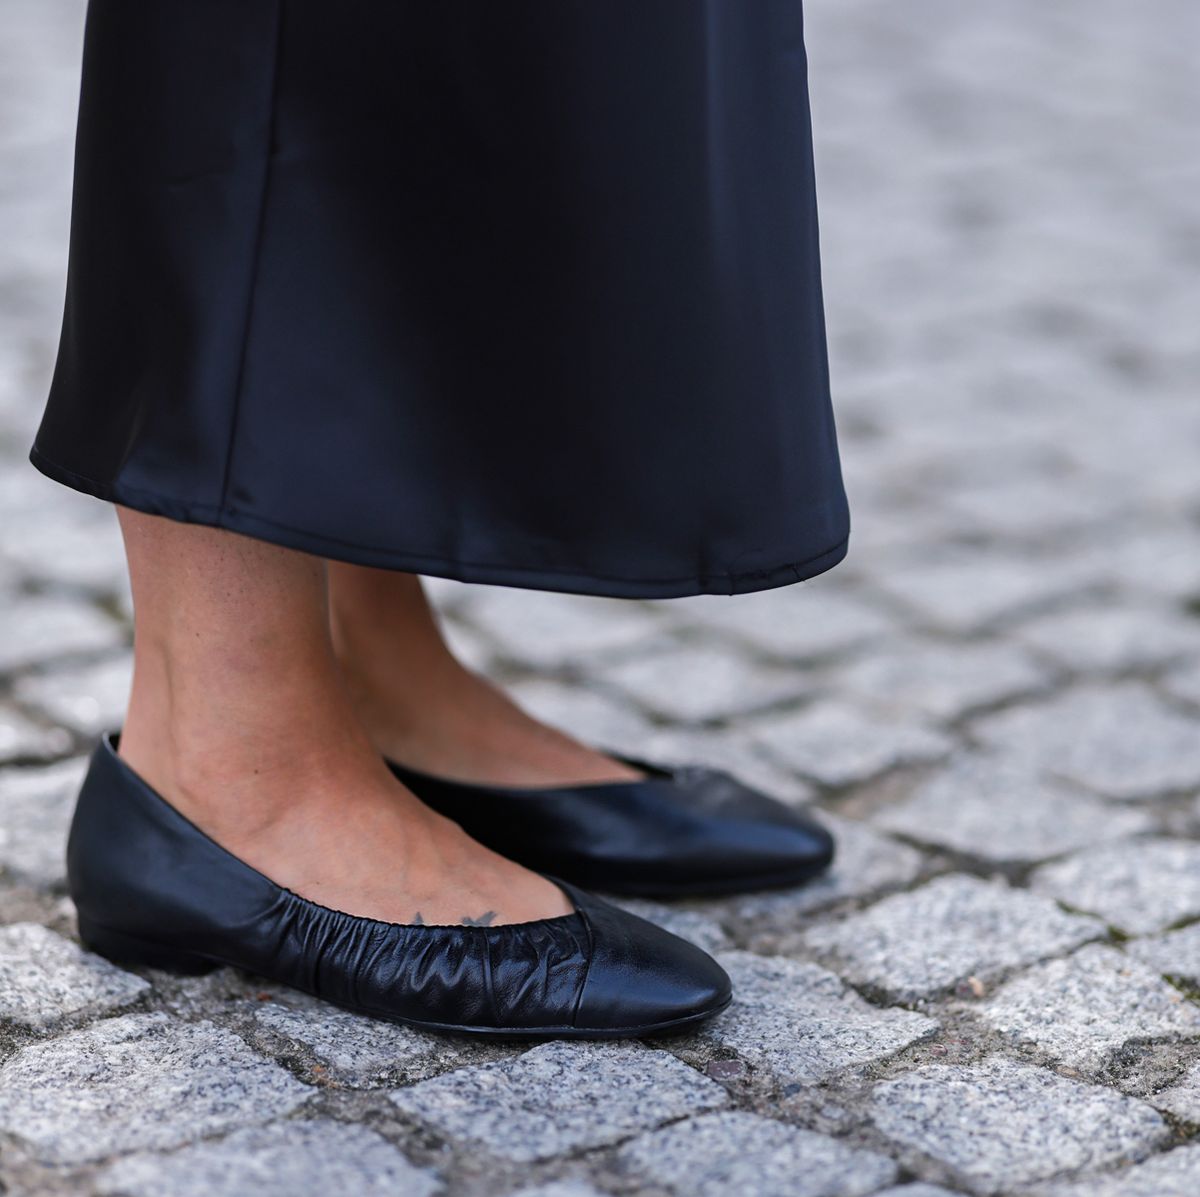 a person's legs in black shoes